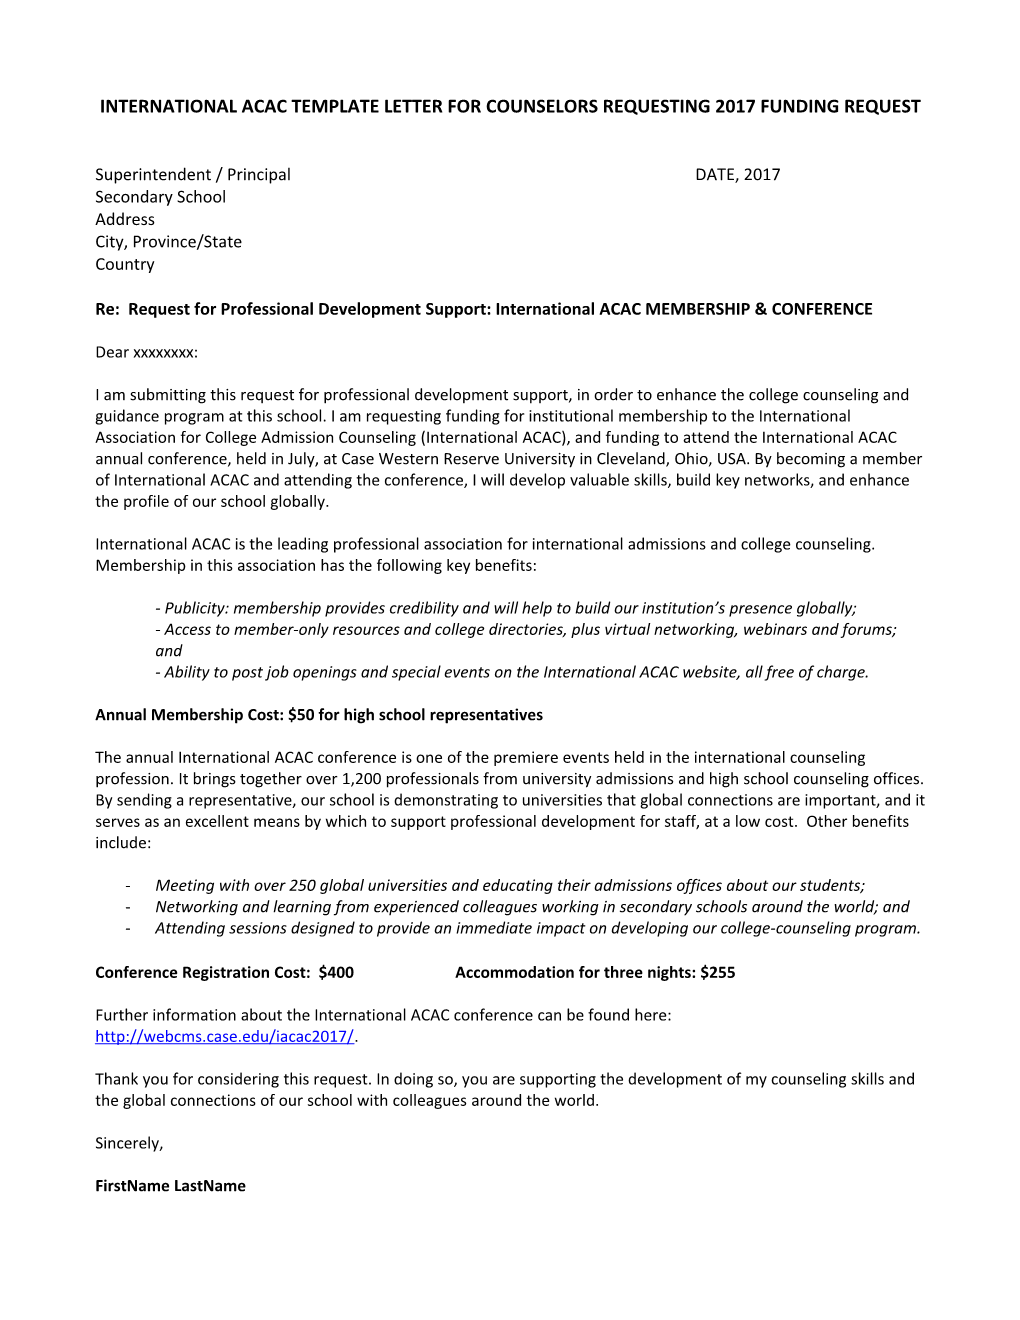 International Acac Template Letter for Counselors Requesting 2017 Funding Request